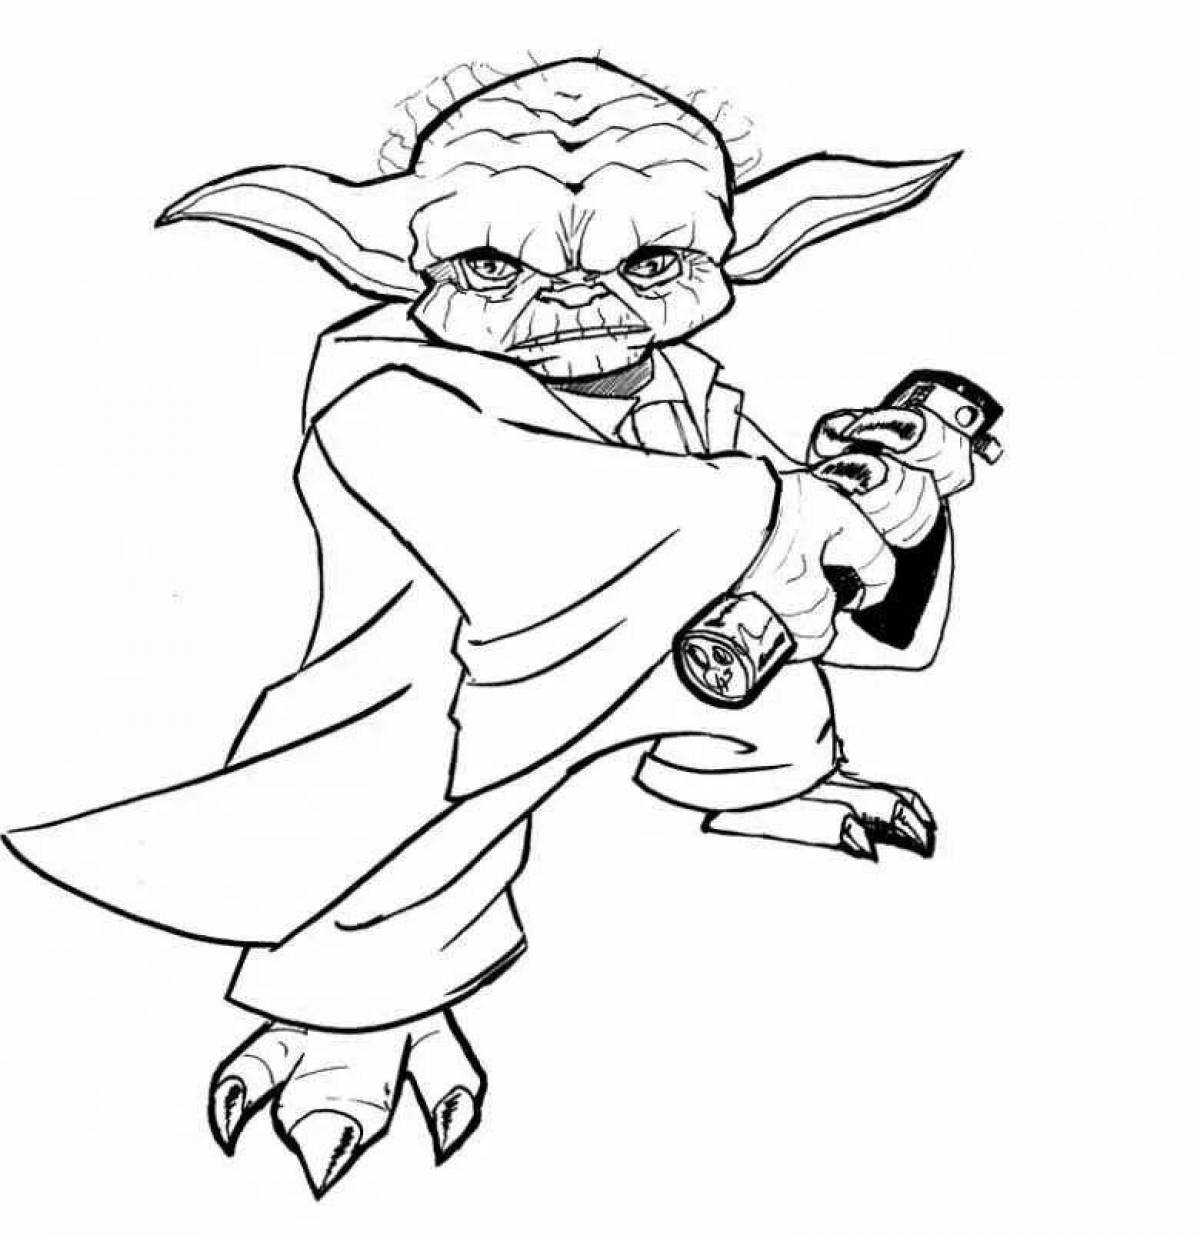 Yoda master's brightly colored coloring page